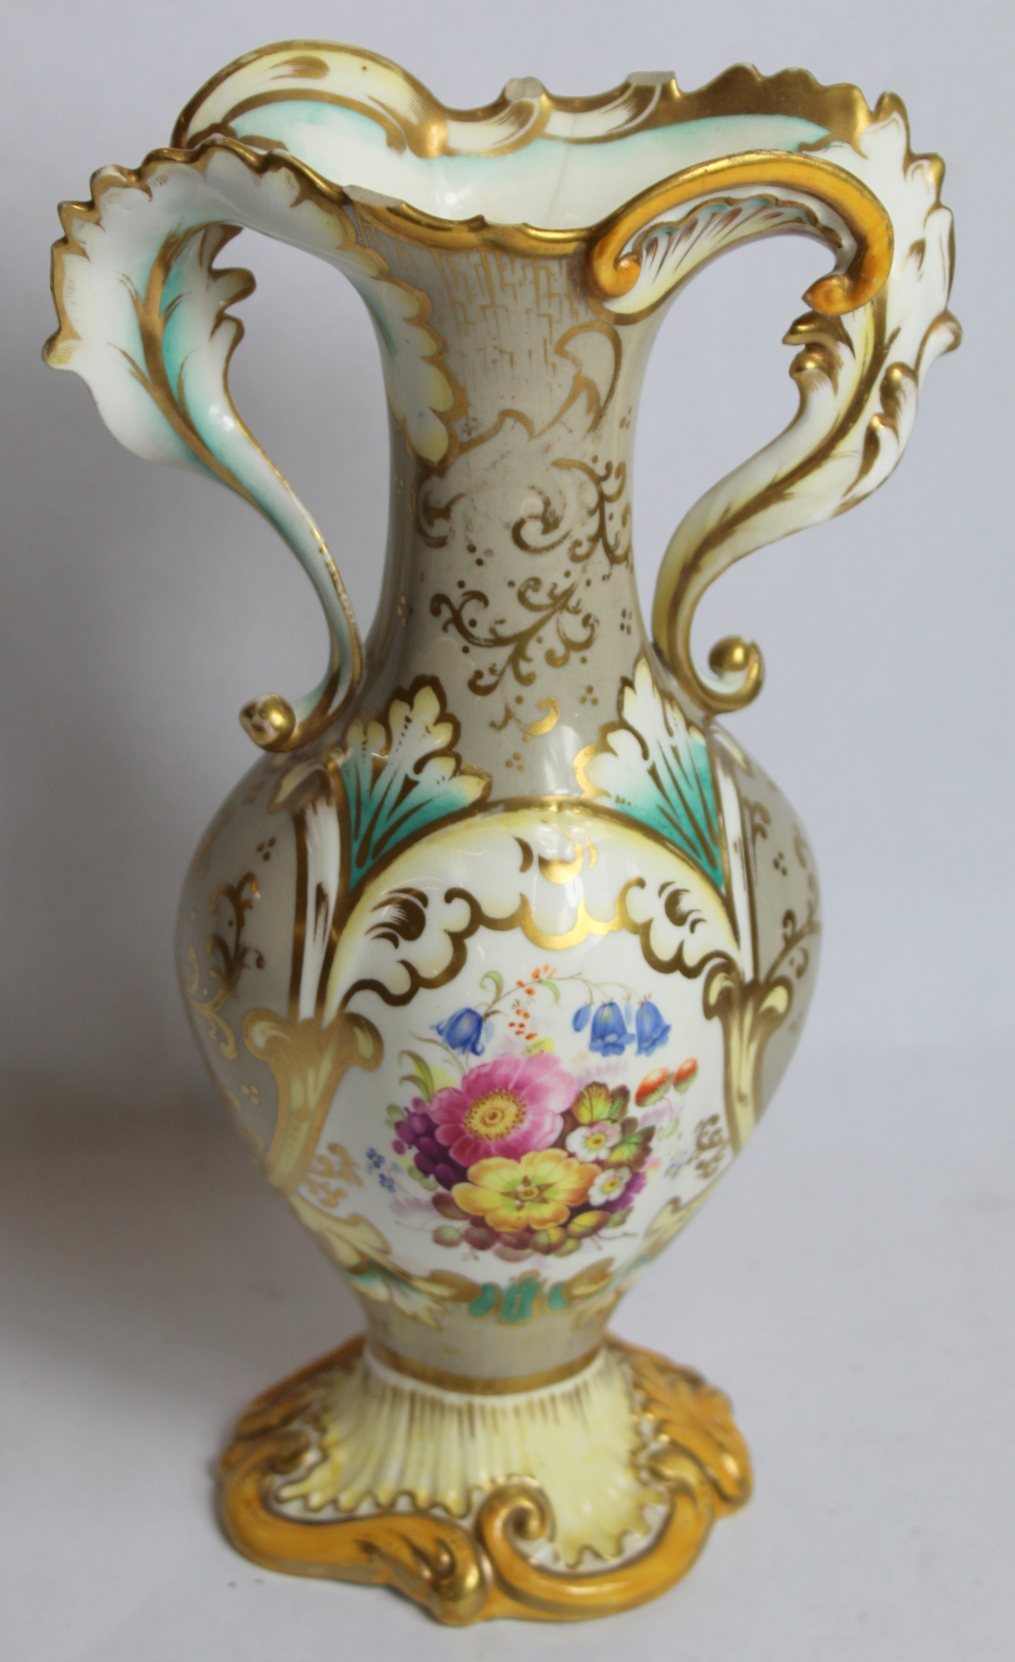 Early 19th century Derby porcelain vase with floral encrustation and moulded gilt foliate scrolling, - Image 7 of 11